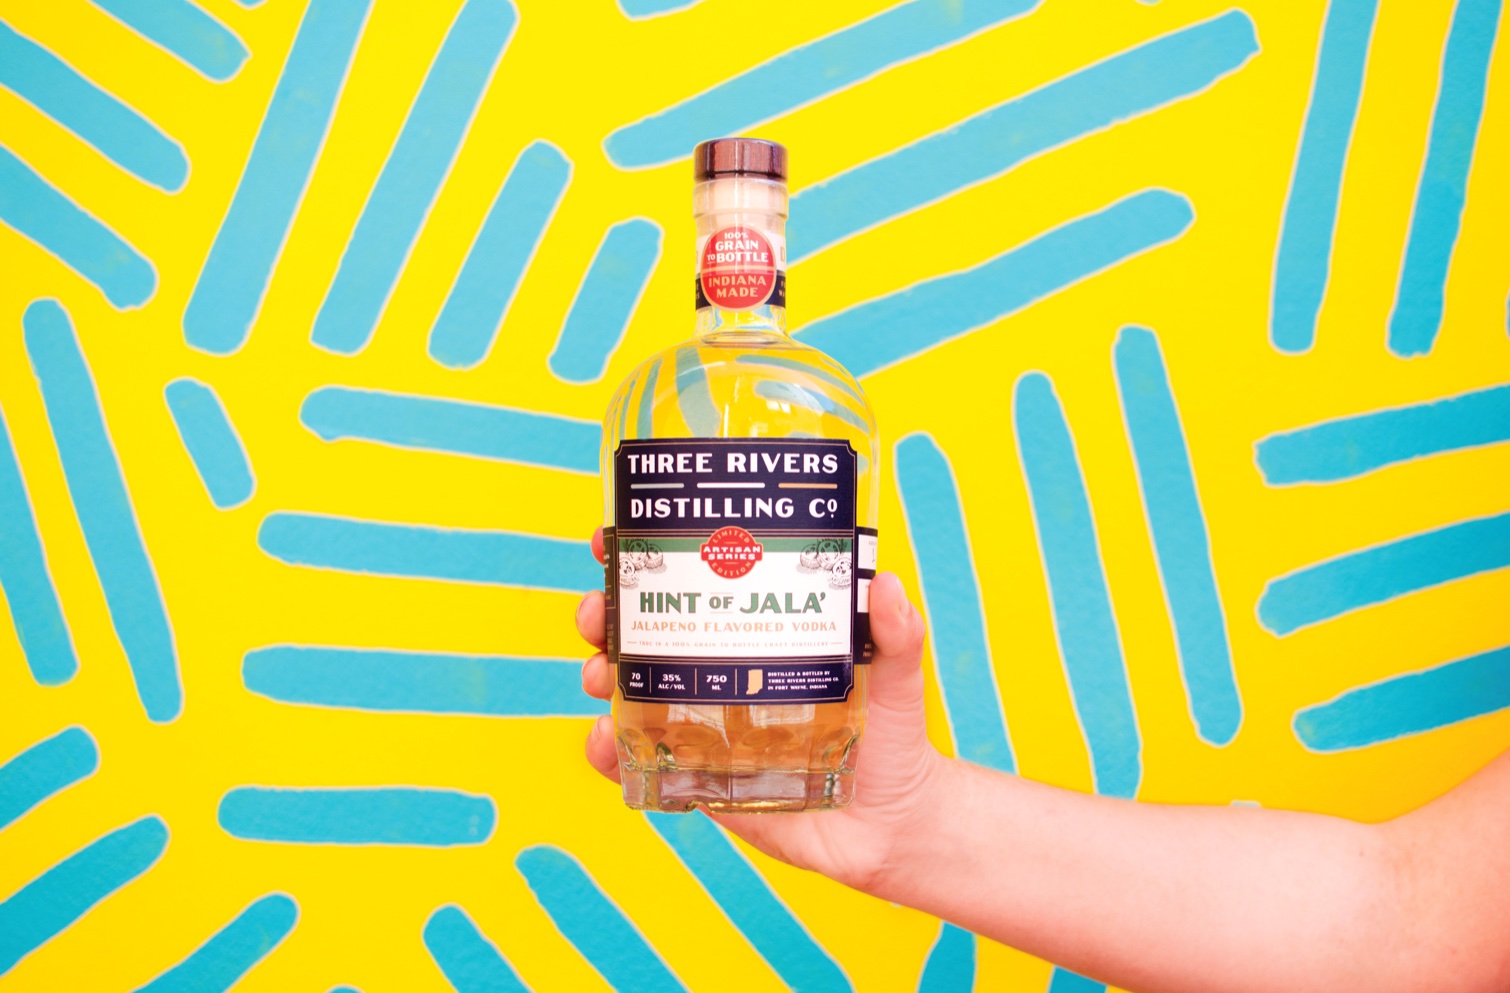 Indiana’s Three Rivers Distilling Co. Get’s An Update